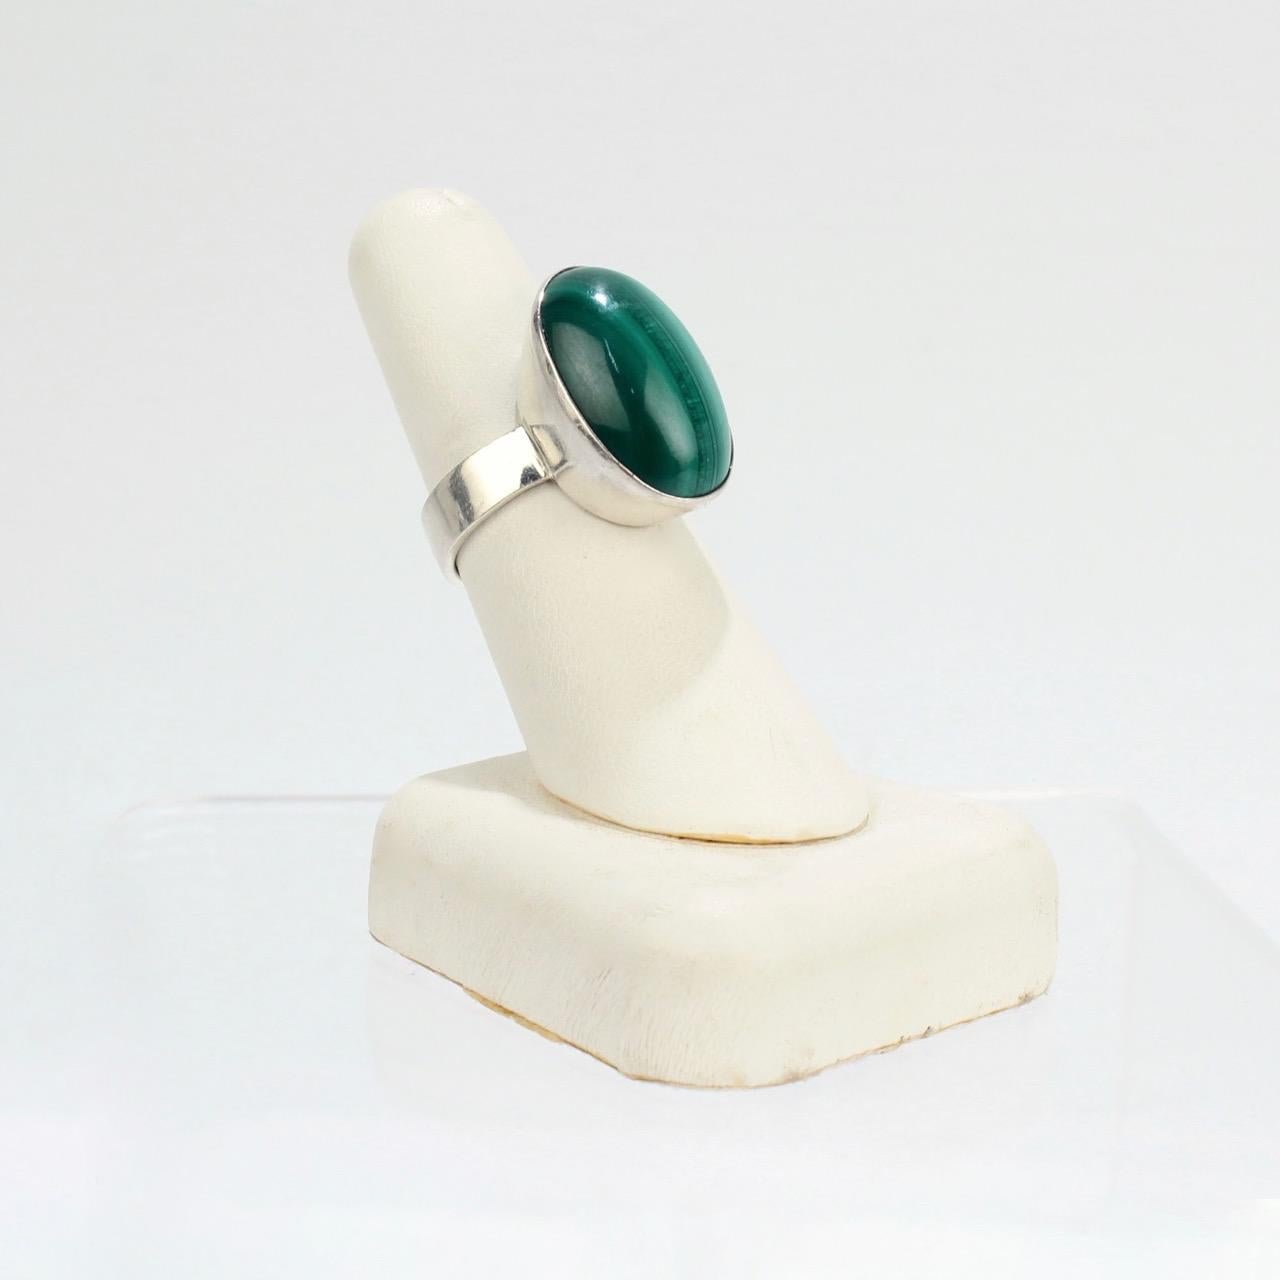 A great 1970s Kaunis Korn modernist ring in sterling silver set with a large malachite cabachon. 

The shank stamped PH for the silversmith (possibly Paul Henningsen), Y7 for 1976, 925, and with the KAUNIS KORU mark.

Ring size: ca. 7 3/4 

Items